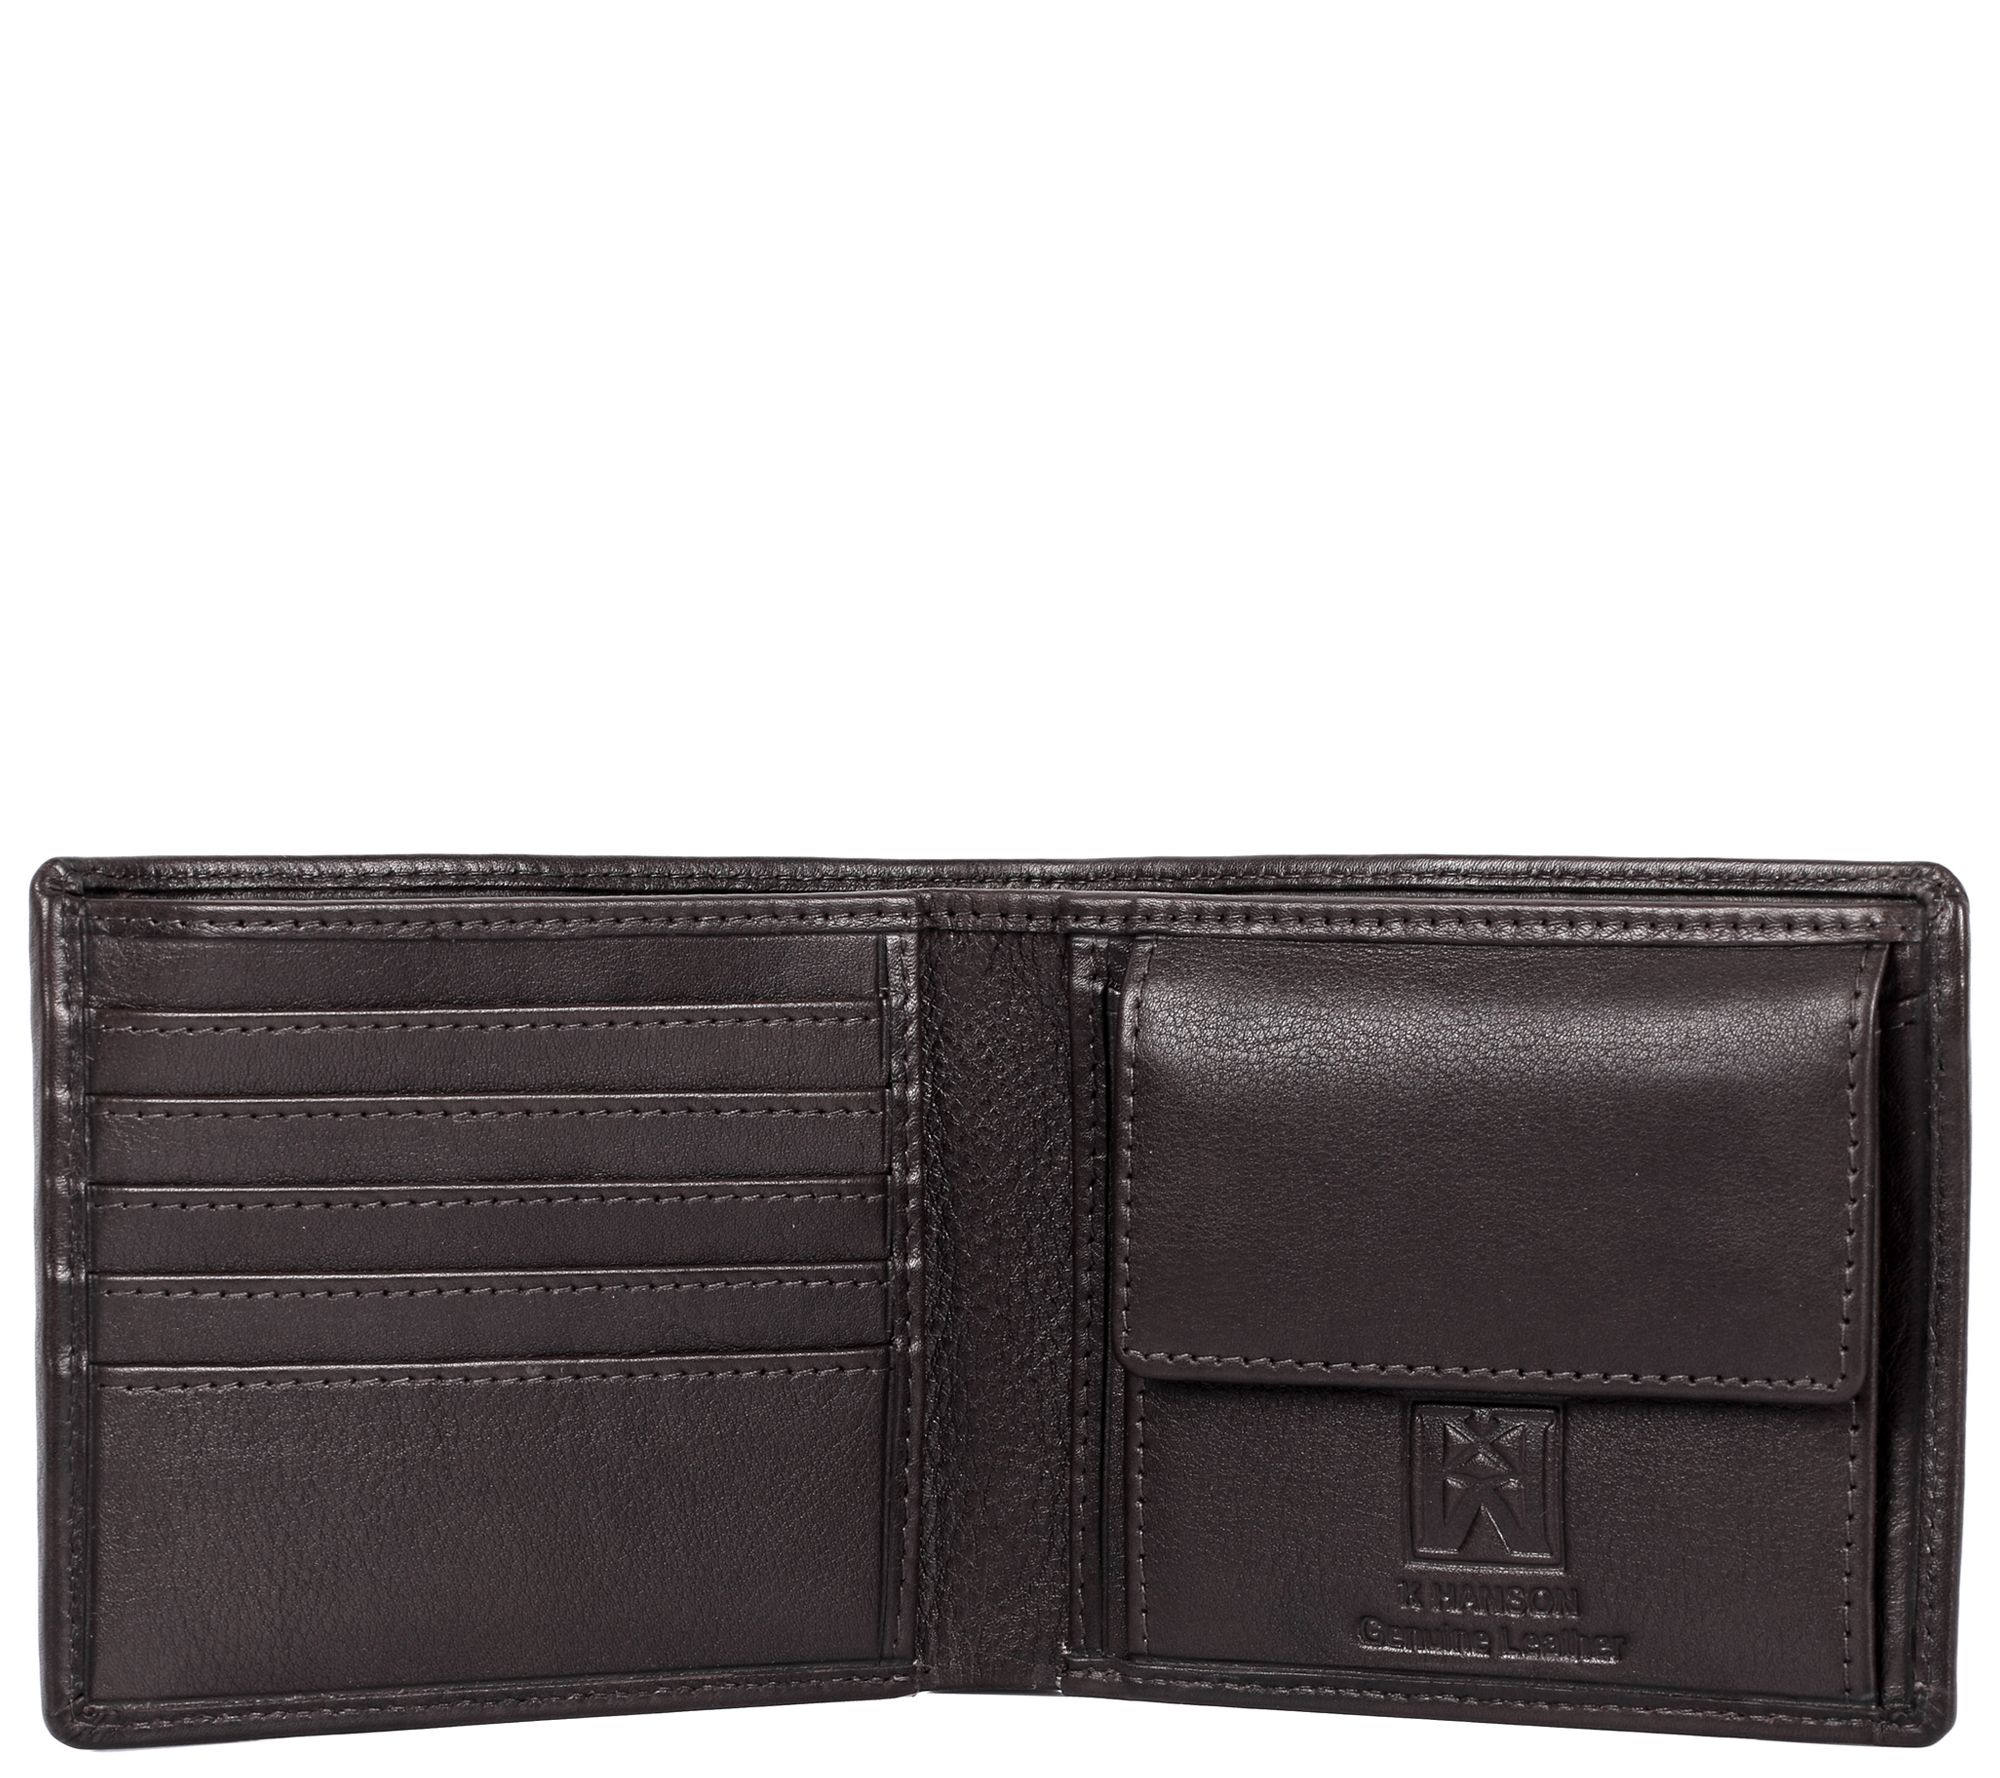 Karla Hanson Men's Leather Wallet with Coin Pocket - QVC.com